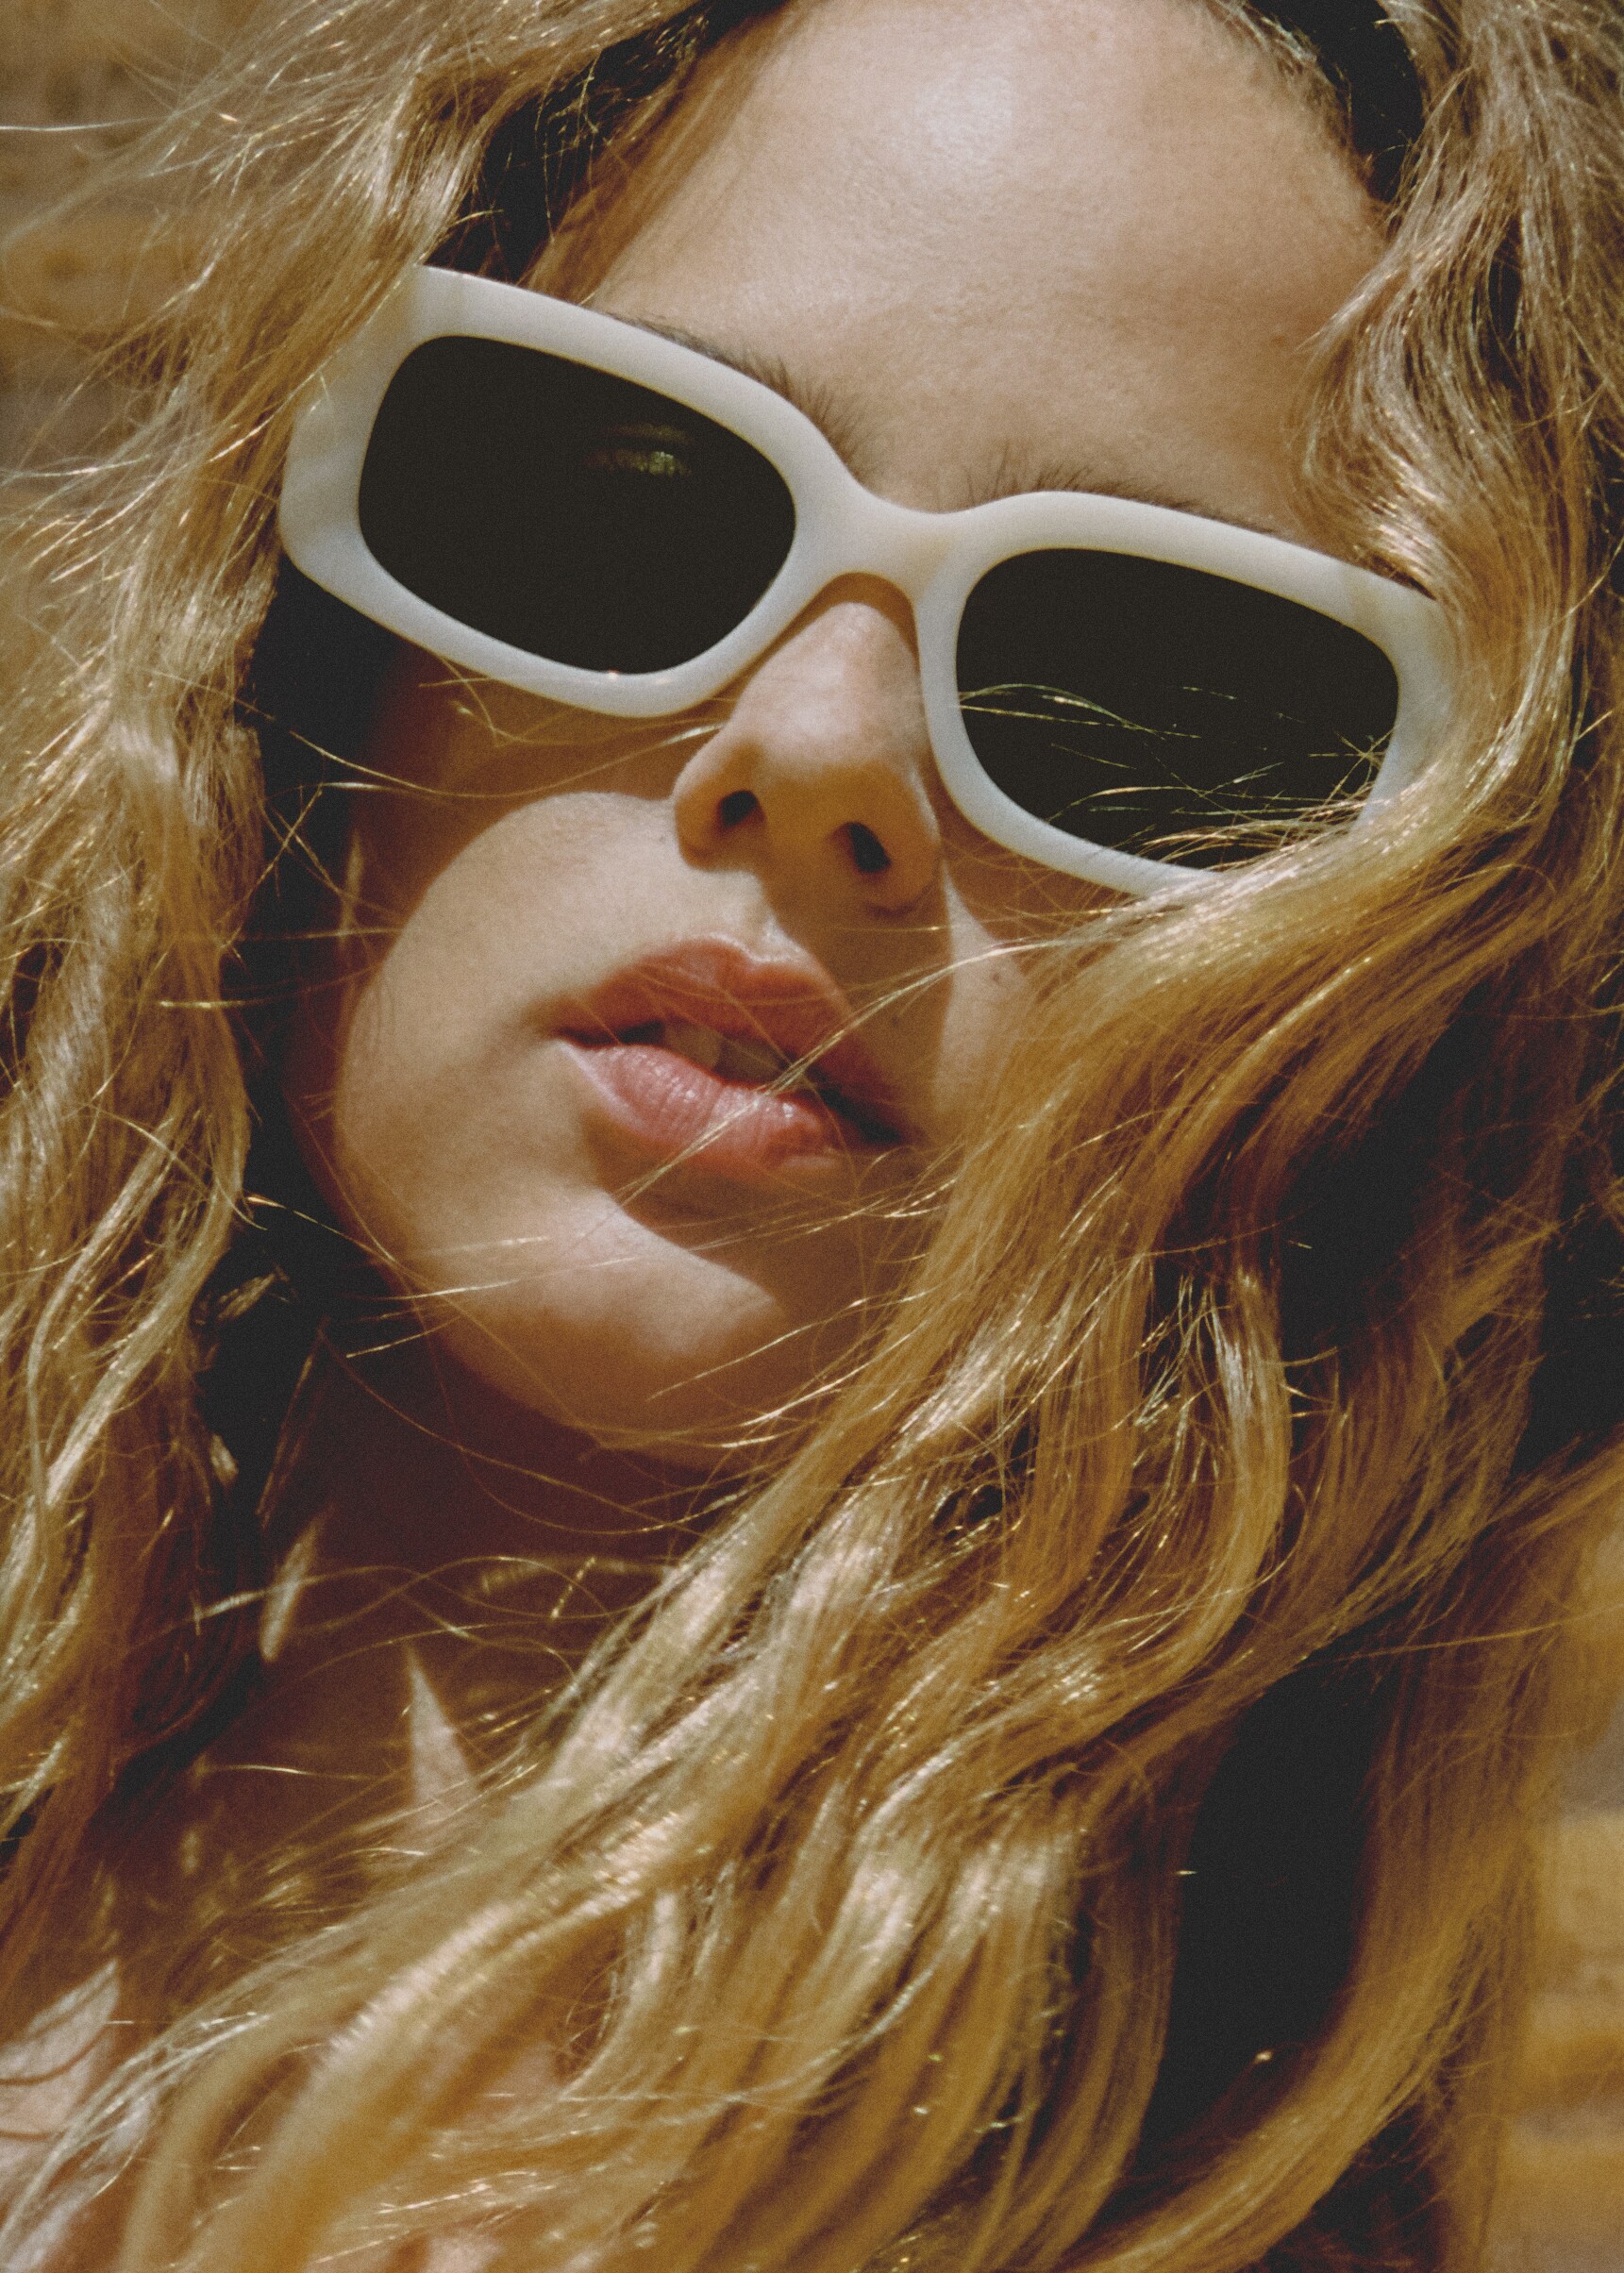 Acetate frame sunglasses - Details of the article 9